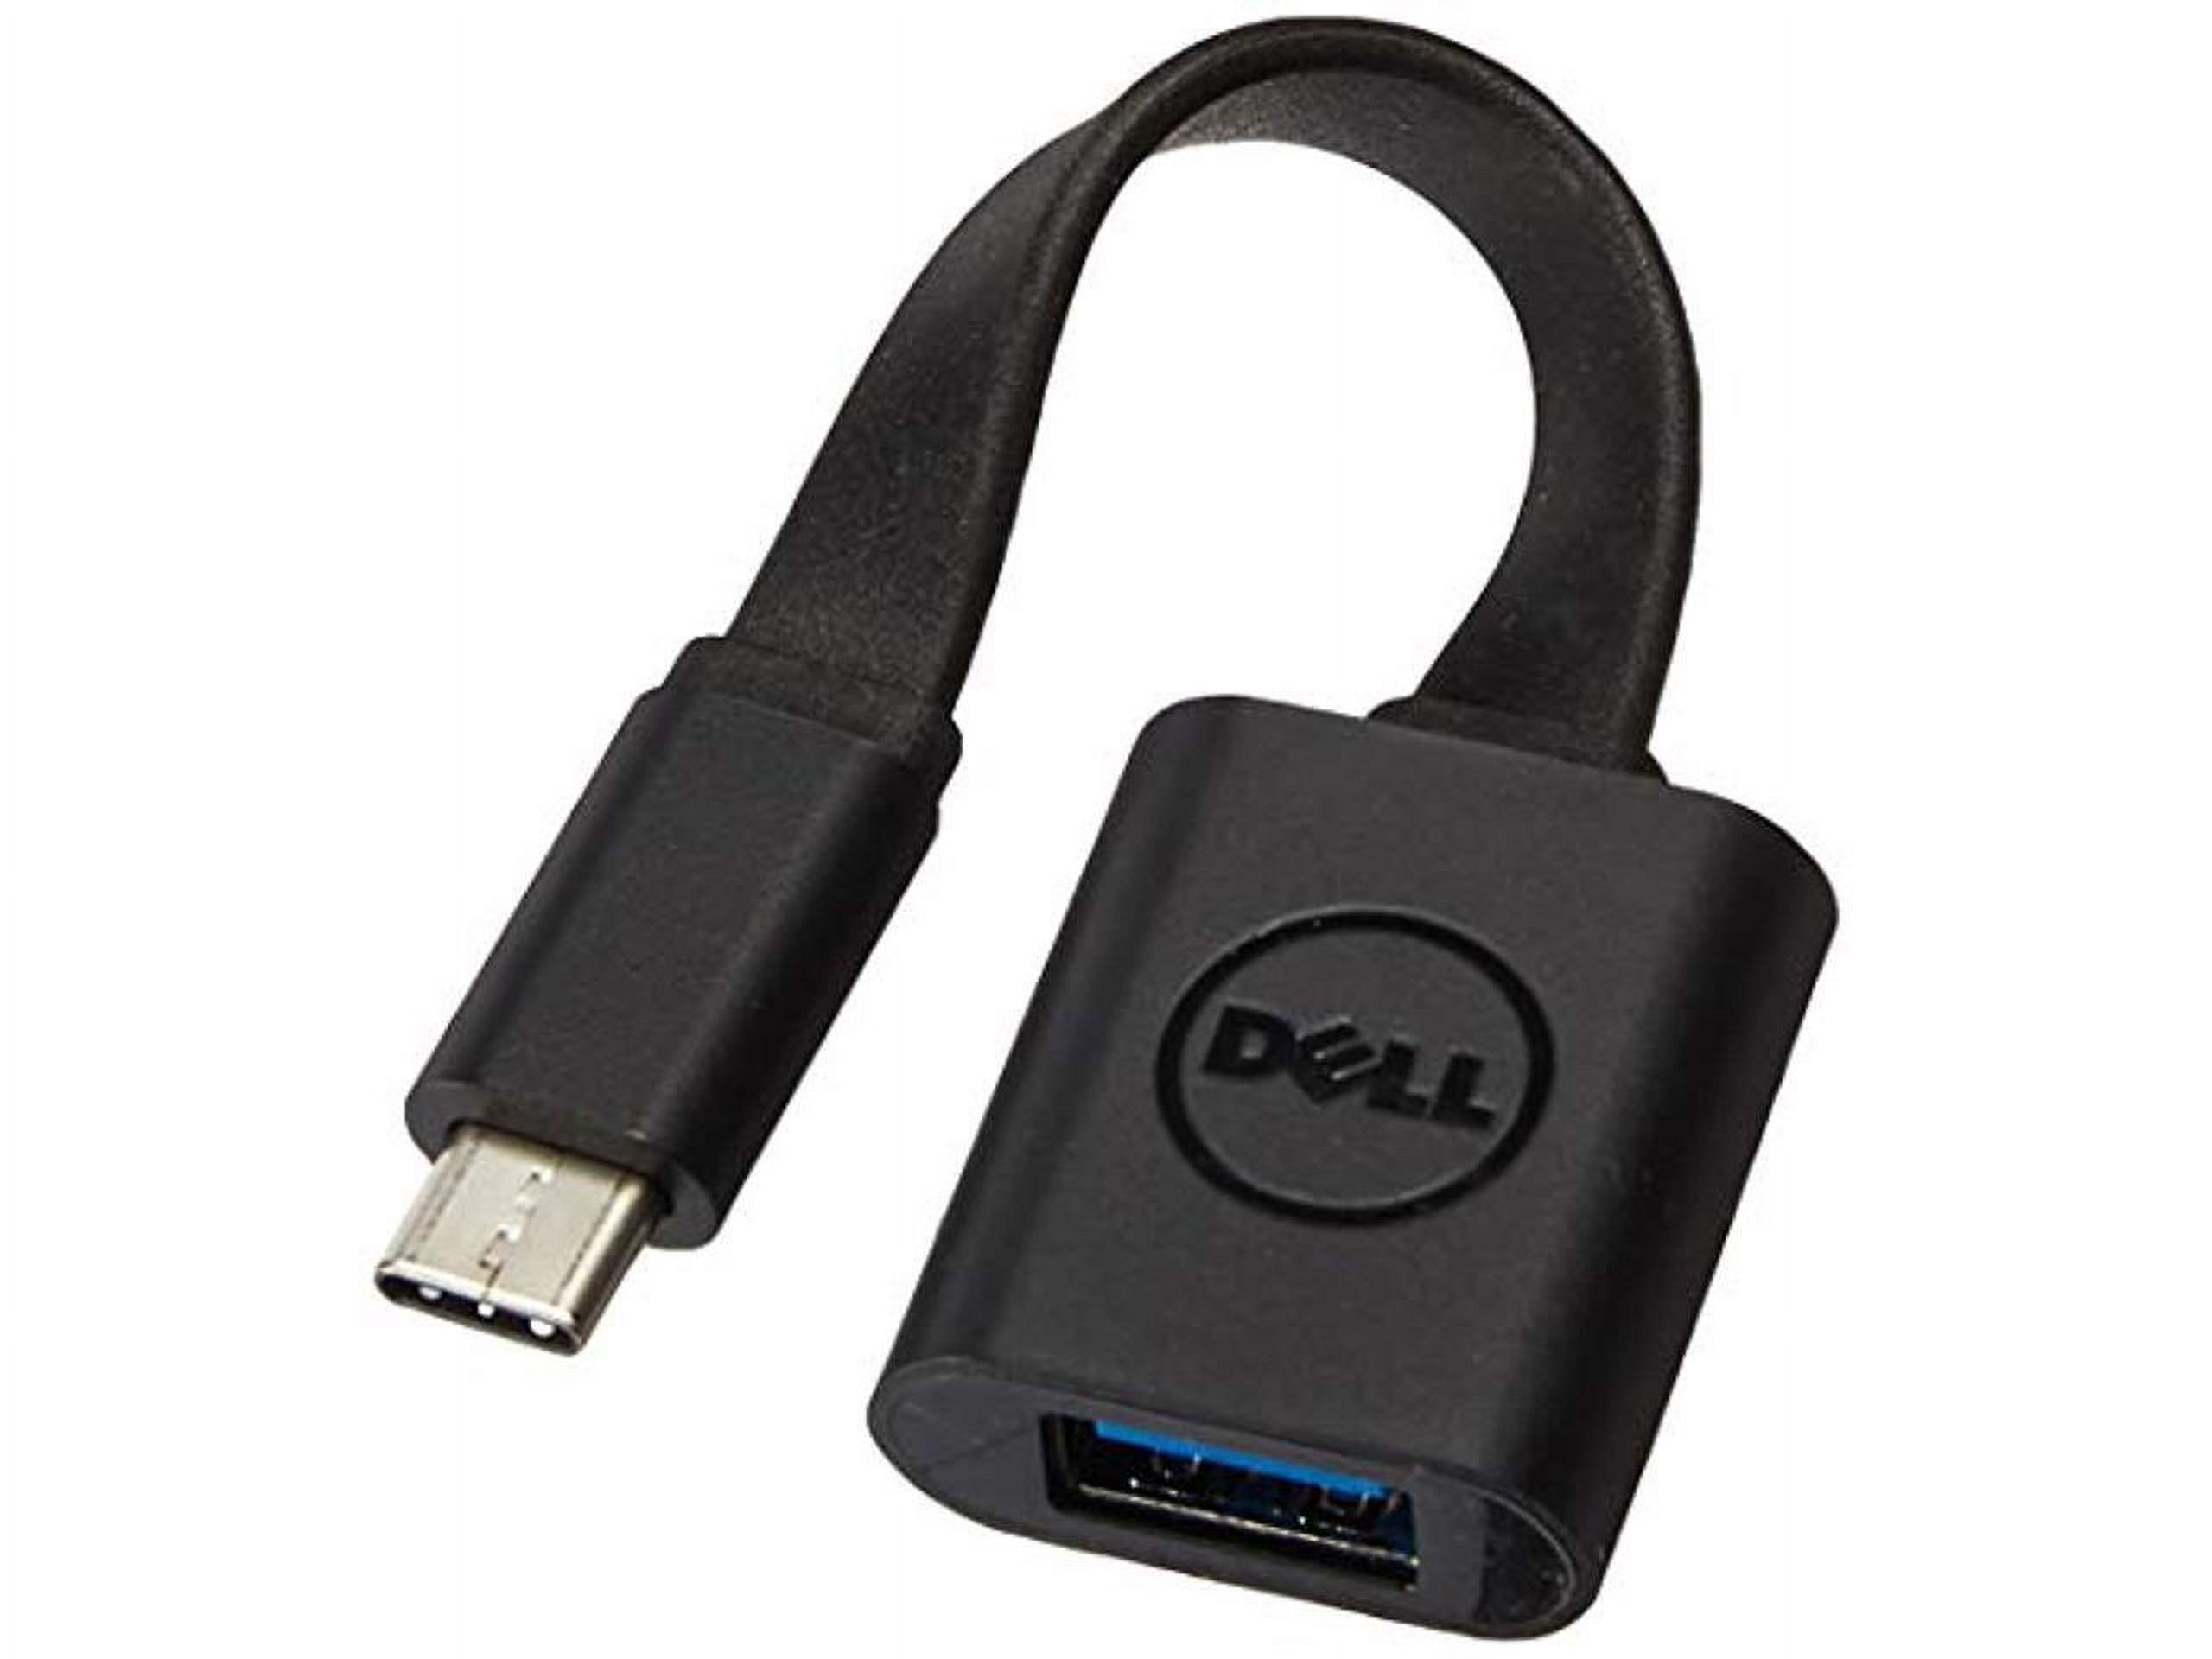 Dell DBQBJBC054 USB-C to USB-A Data Transfer Cable - image 5 of 11